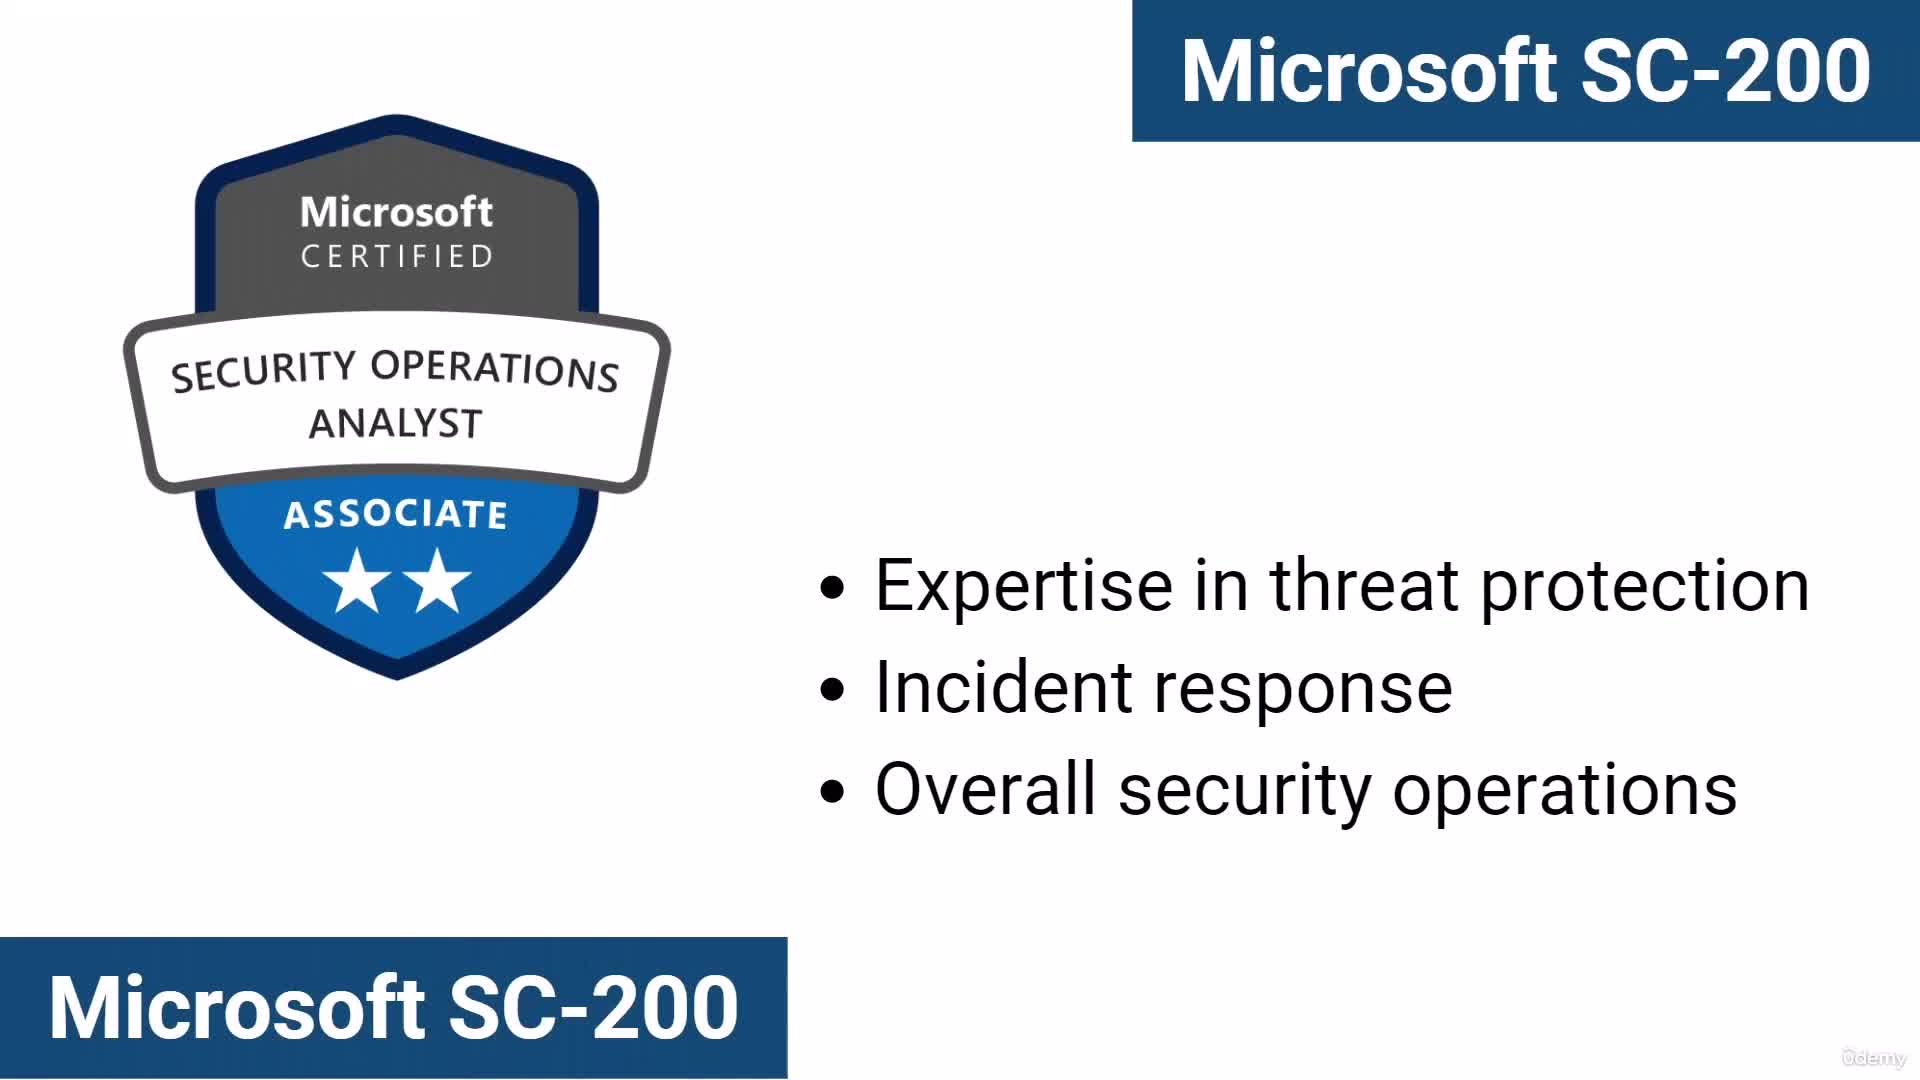 SC-200, Microsoft Security Operations Analyst